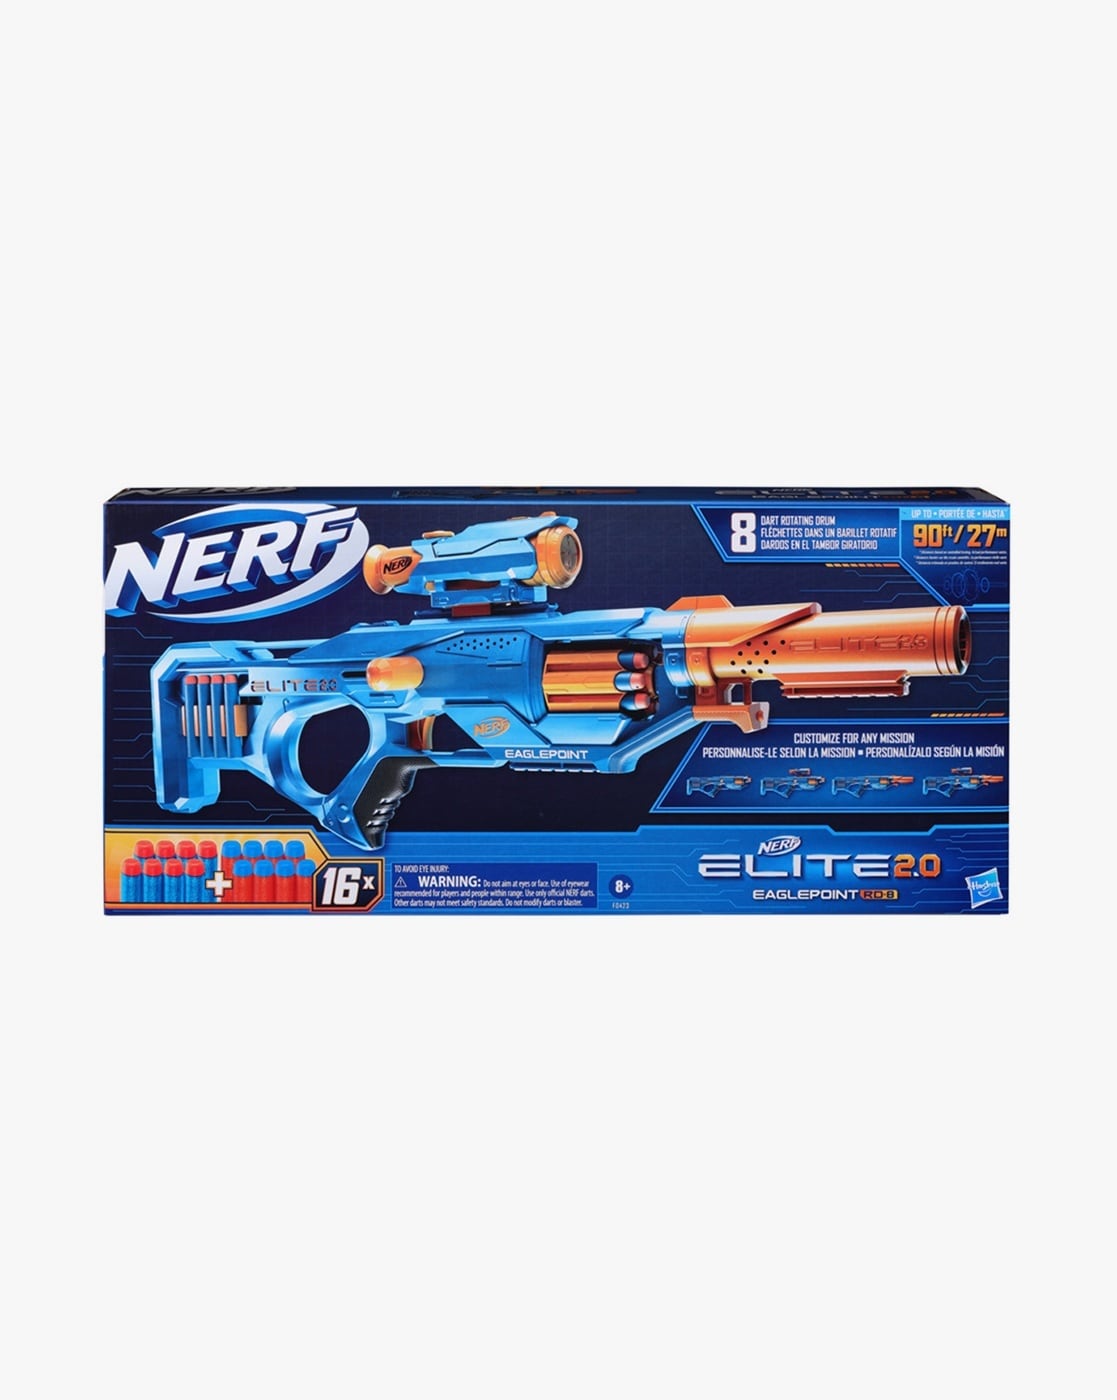 Mod 999 Plastic Toy Rifle By Airsoft Gun India at Rs 1800